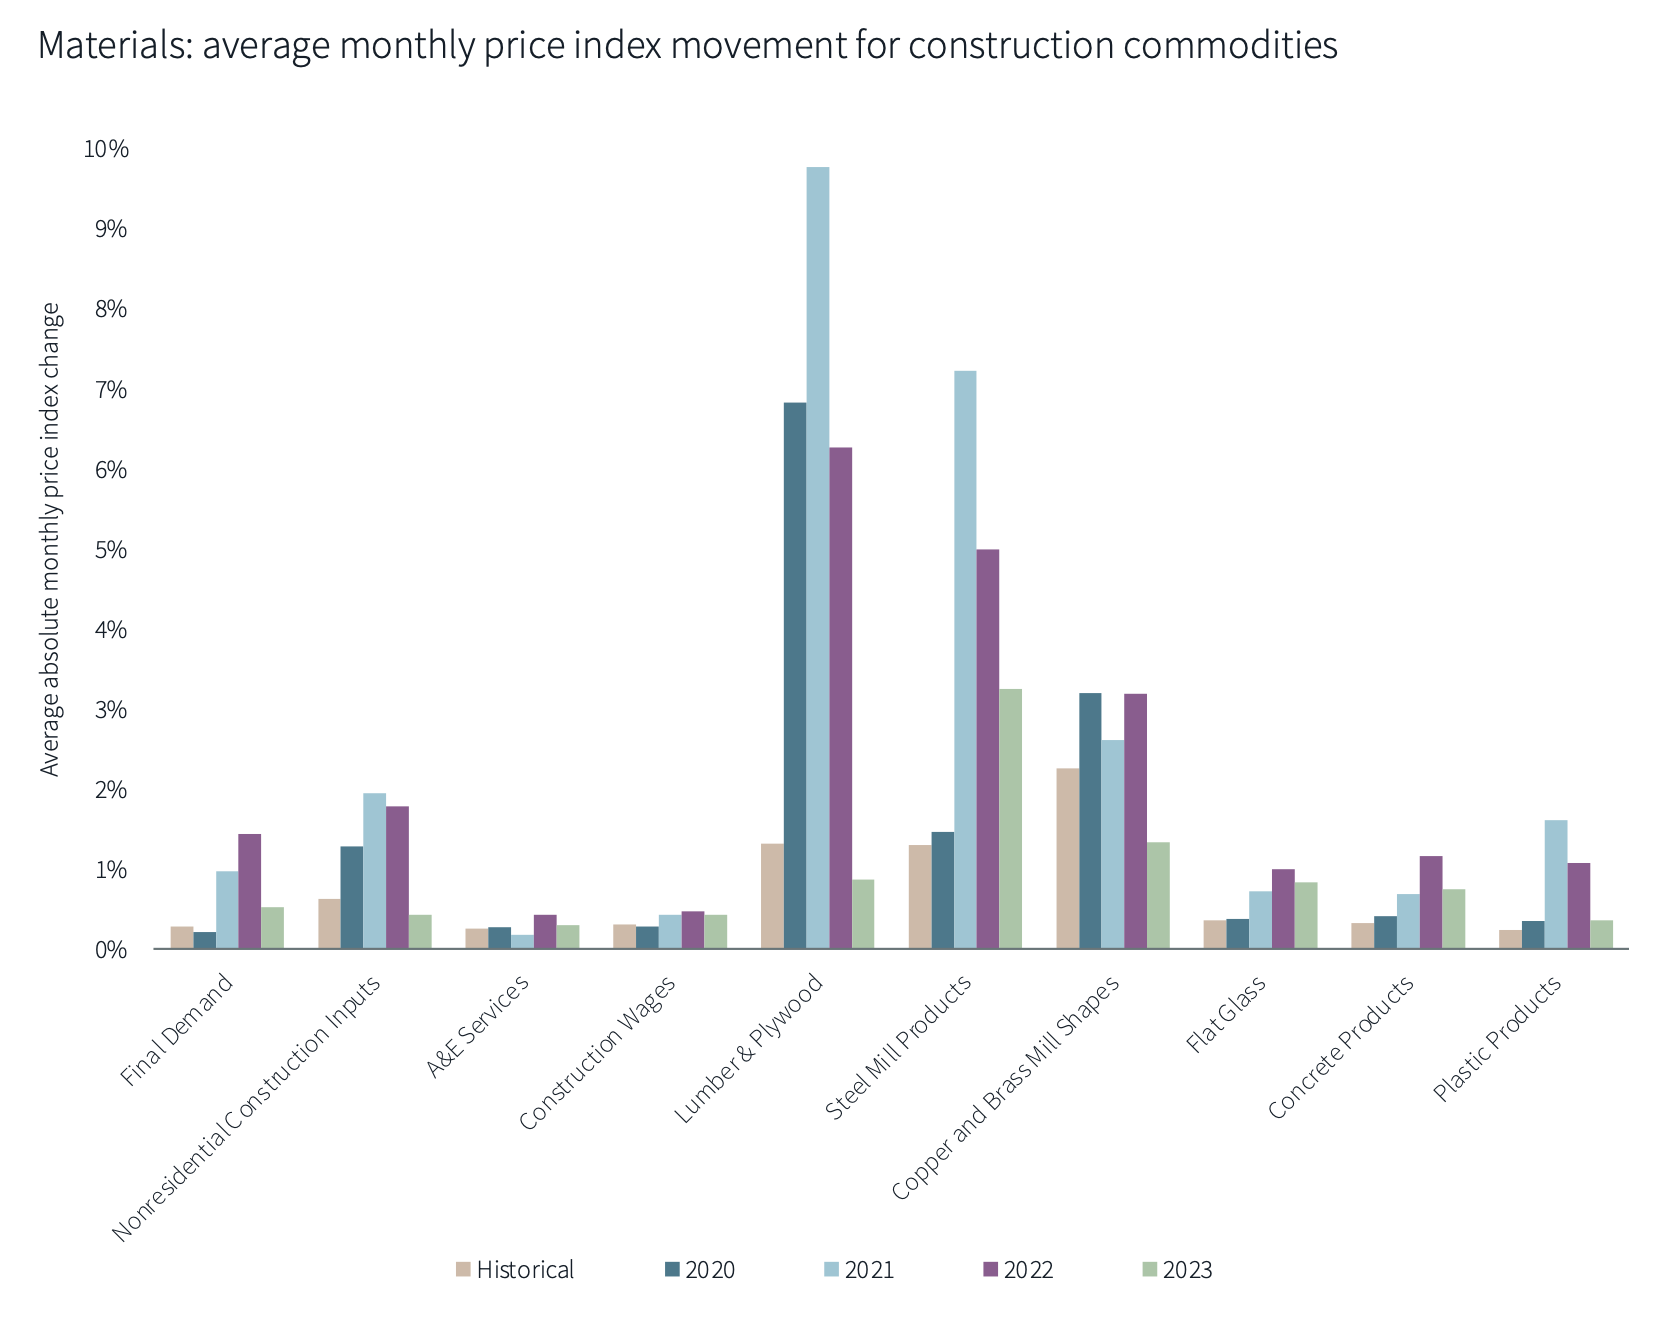 Materials costs vary by commodity